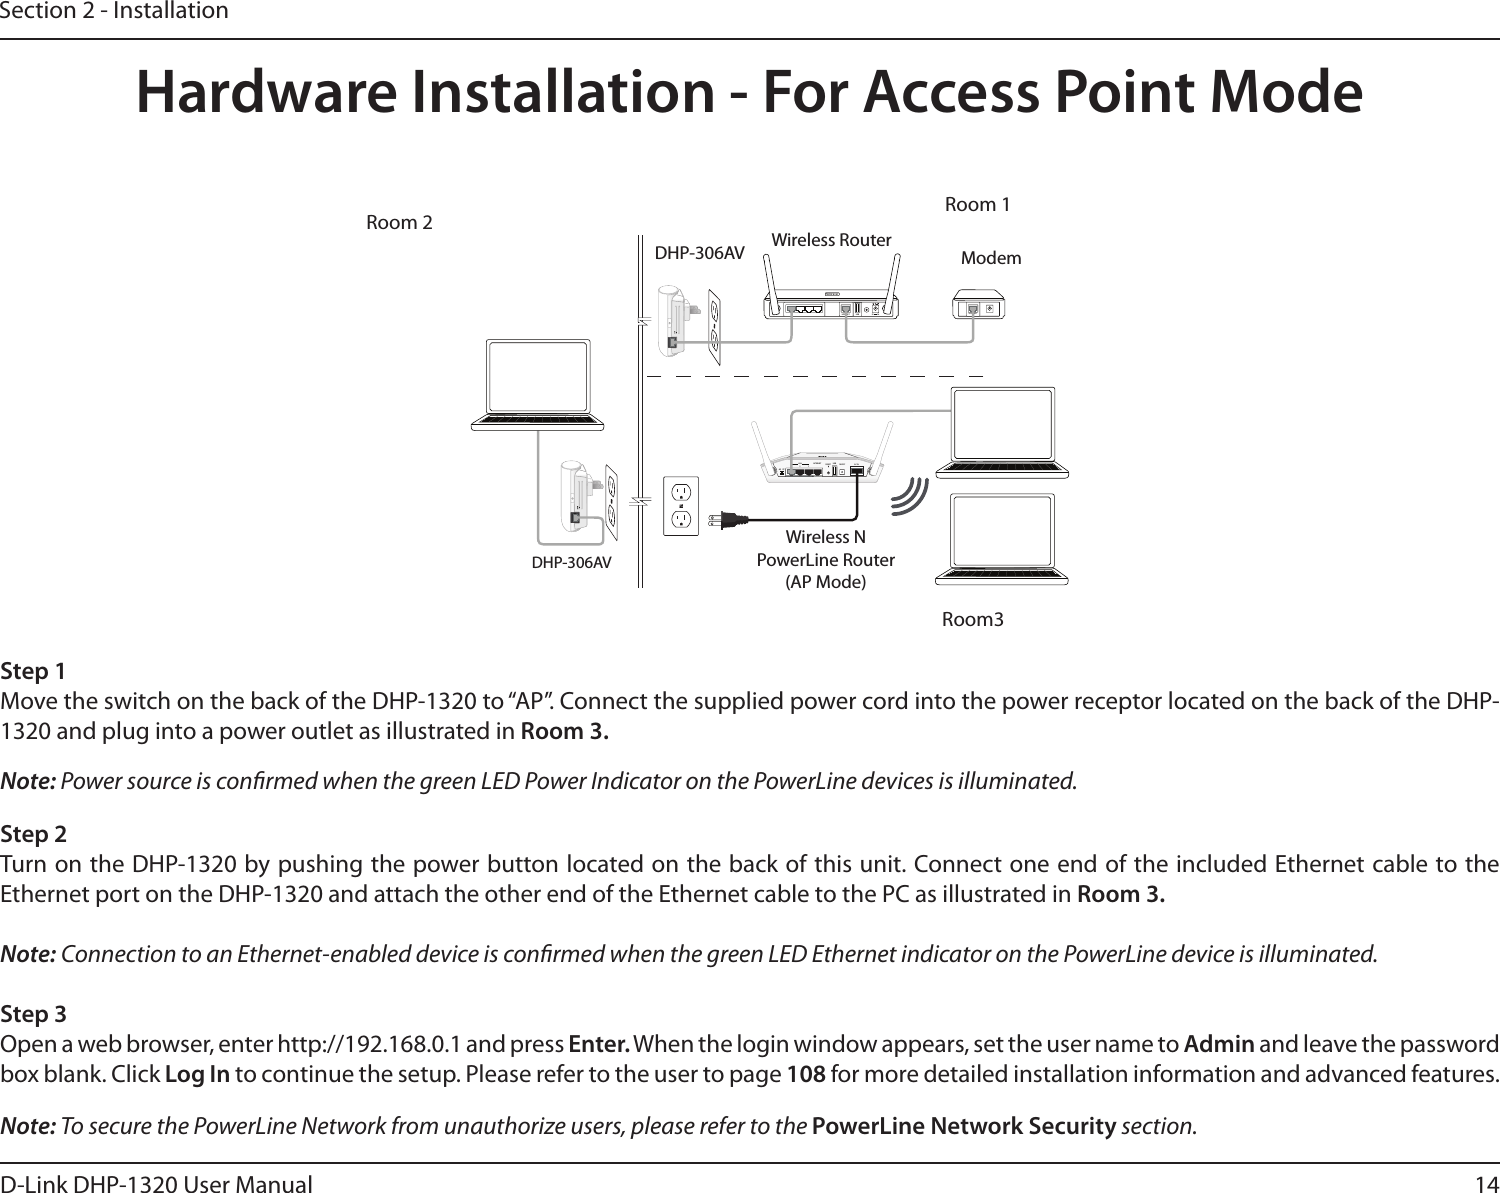 14D-Link DHP-1320 User ManualSection 2 - InstallationHardware Installation - For Access Point Mode5V- - - 3A1 2 LAN 3 4 INTERNET USBRESETINTERNET1 2 3INTERNETLANAR RTUSBRESET ON/OFF AC IN1 2 3INTERNETLANAR RTUSBRESET ON/OFF AC ININTERNETDHP-306AVWireless RouterModemWireless N PowerLine Router (AP Mode) DHP-306AVStep 2Turn on the DHP-1320 by pushing the power button located on the back of this unit. Connect one end of the included Ethernet cable to the Ethernet port on the DHP-1320 and attach the other end of the Ethernet cable to the PC as illustrated in Room 3.Note: Connection to an Ethernet-enabled device is conrmed when the green LED Ethernet indicator on the PowerLine device is illuminated. Step 3Open a web browser, enter http://192.168.0.1 and press Enter. When the login window appears, set the user name to Admin and leave the password box blank. Click Log In to continue the setup. Please refer to the user to page 108 for more detailed installation information and advanced features.Step 1Move the switch on the back of the DHP-1320 to “AP”. Connect the supplied power cord into the power receptor located on the back of the DHP-1320 and plug into a power outlet as illustrated in Room 3. Note: To secure the PowerLine Network from unauthorize users, please refer to the PowerLine Network Security section.Note: Power source is conrmed when the green LED Power Indicator on the PowerLine devices is illuminated. Room 2 Room 1Room3